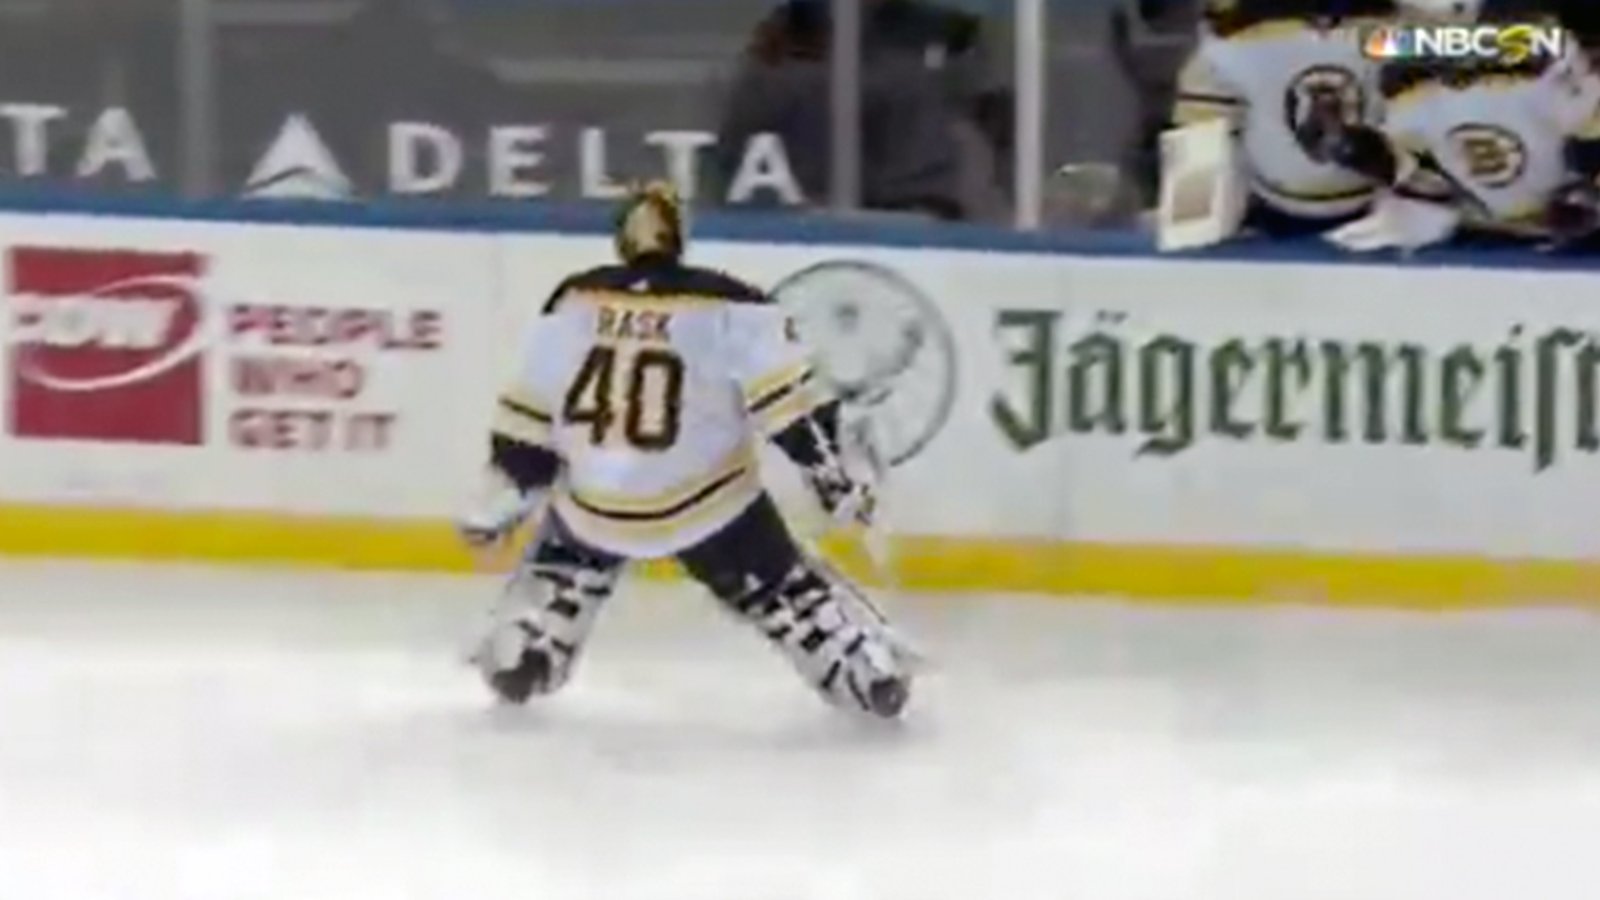 Rask heads to the bench for the extra man... with the score tied 2-2 and no delayed penalty 